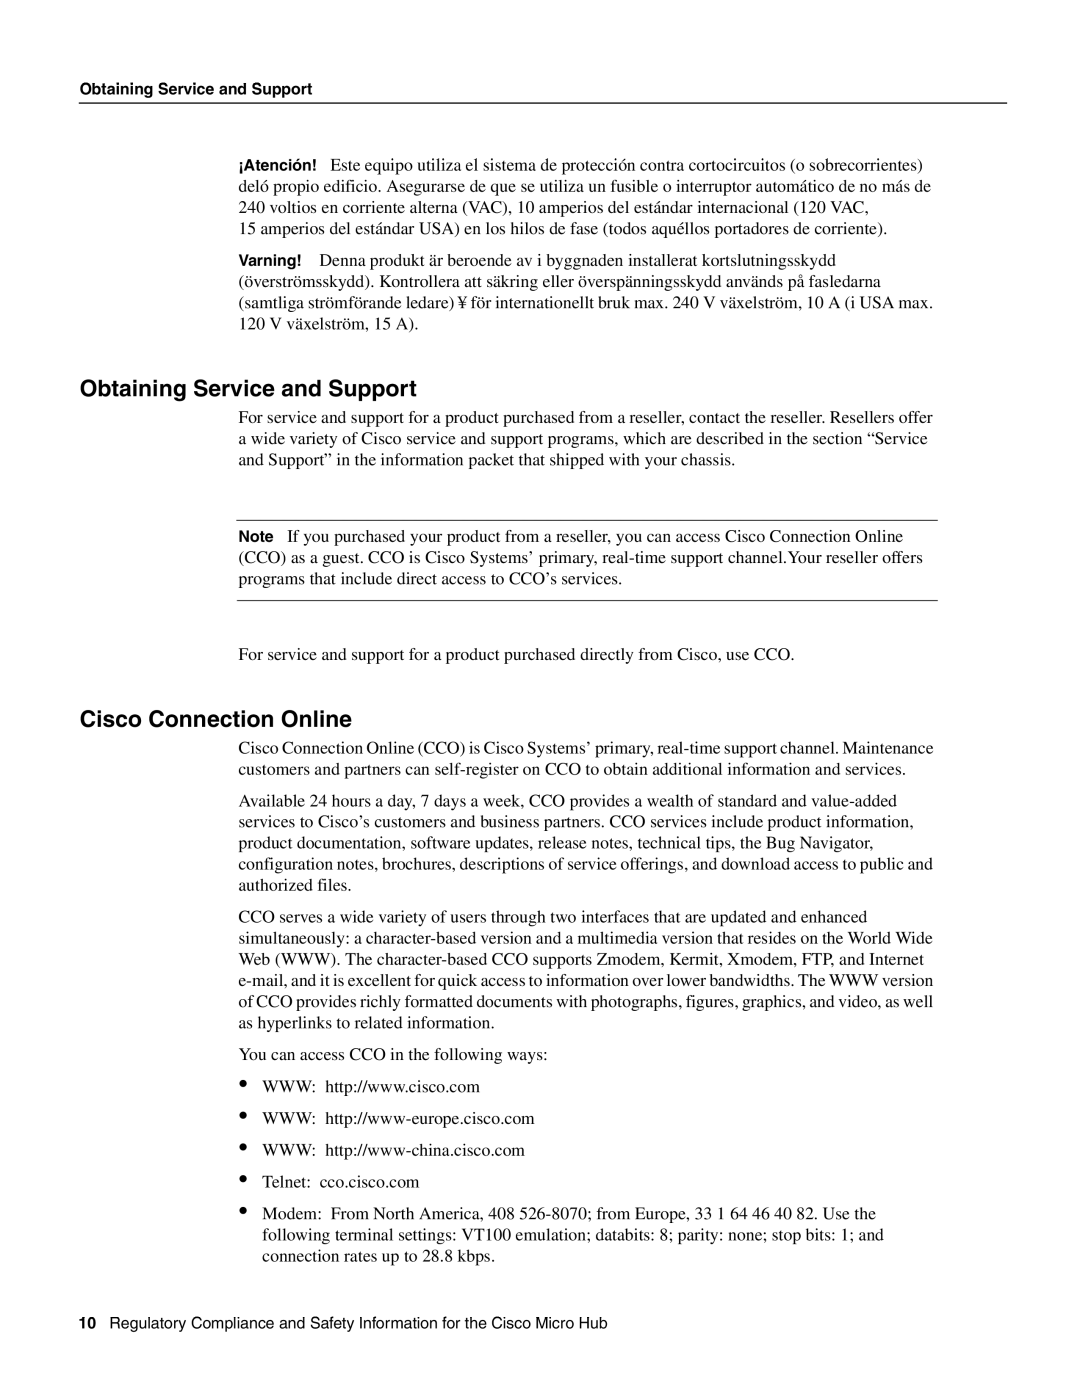 Cisco Systems CISCO1501 manual Obtaining Service and Support, Cisco Connection Online 